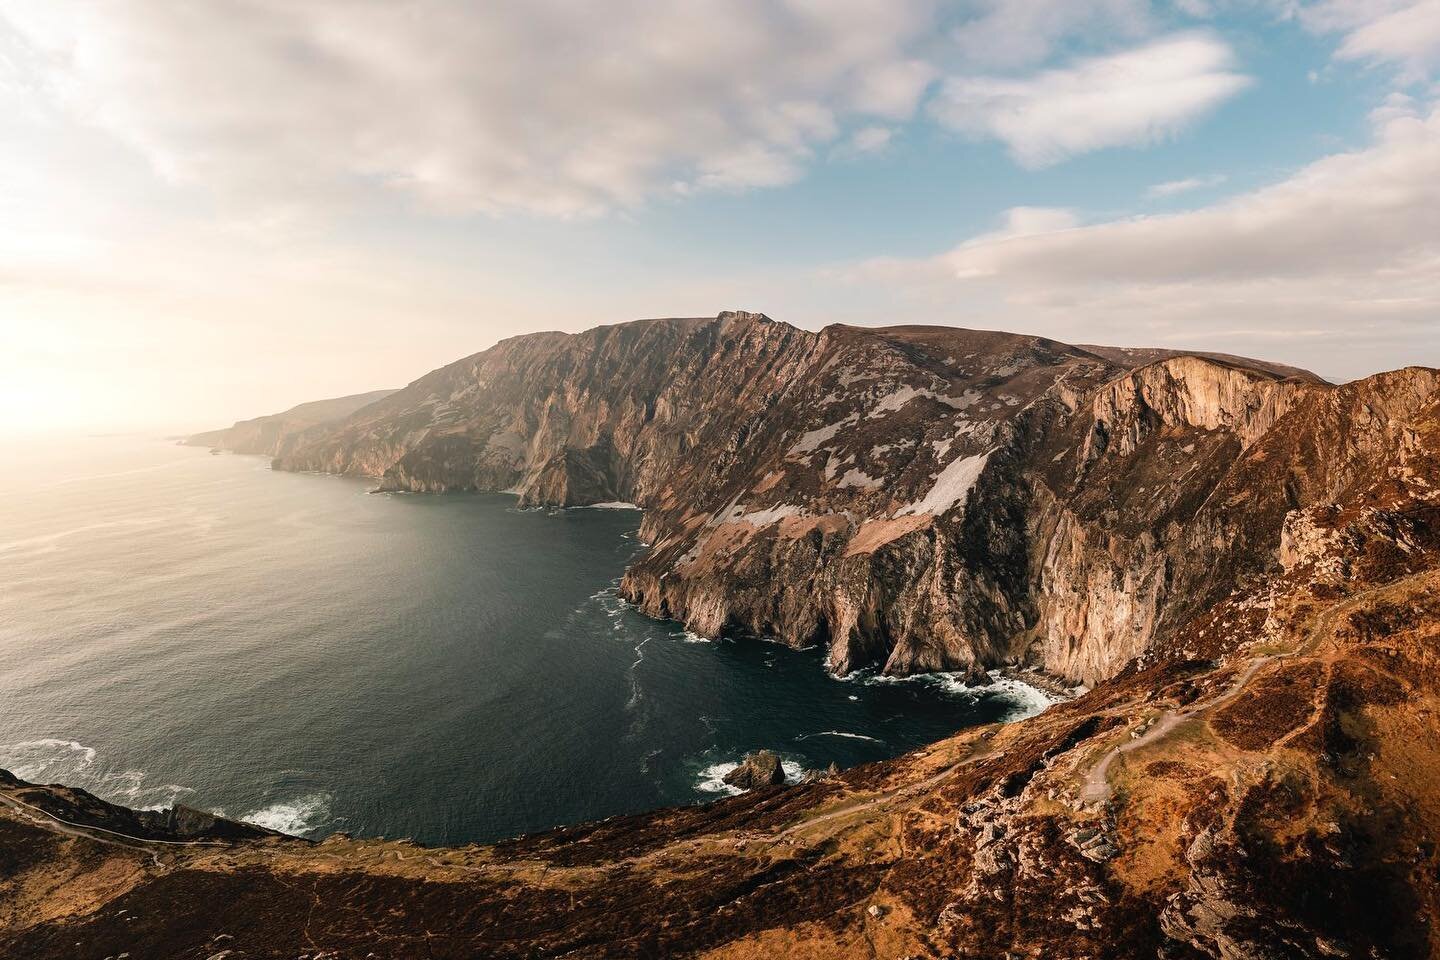 Slieve League Cliffs

Sliabh Liag (Slieve League) is Irish for &lsquo;mountain of stone pillars.&rsquo; These gorgeous sea cliffs, on the west coast of Ireland, rise 2000ft up from the wild Atlantic Ocean.

For years, Sliabh Liag has always felt like